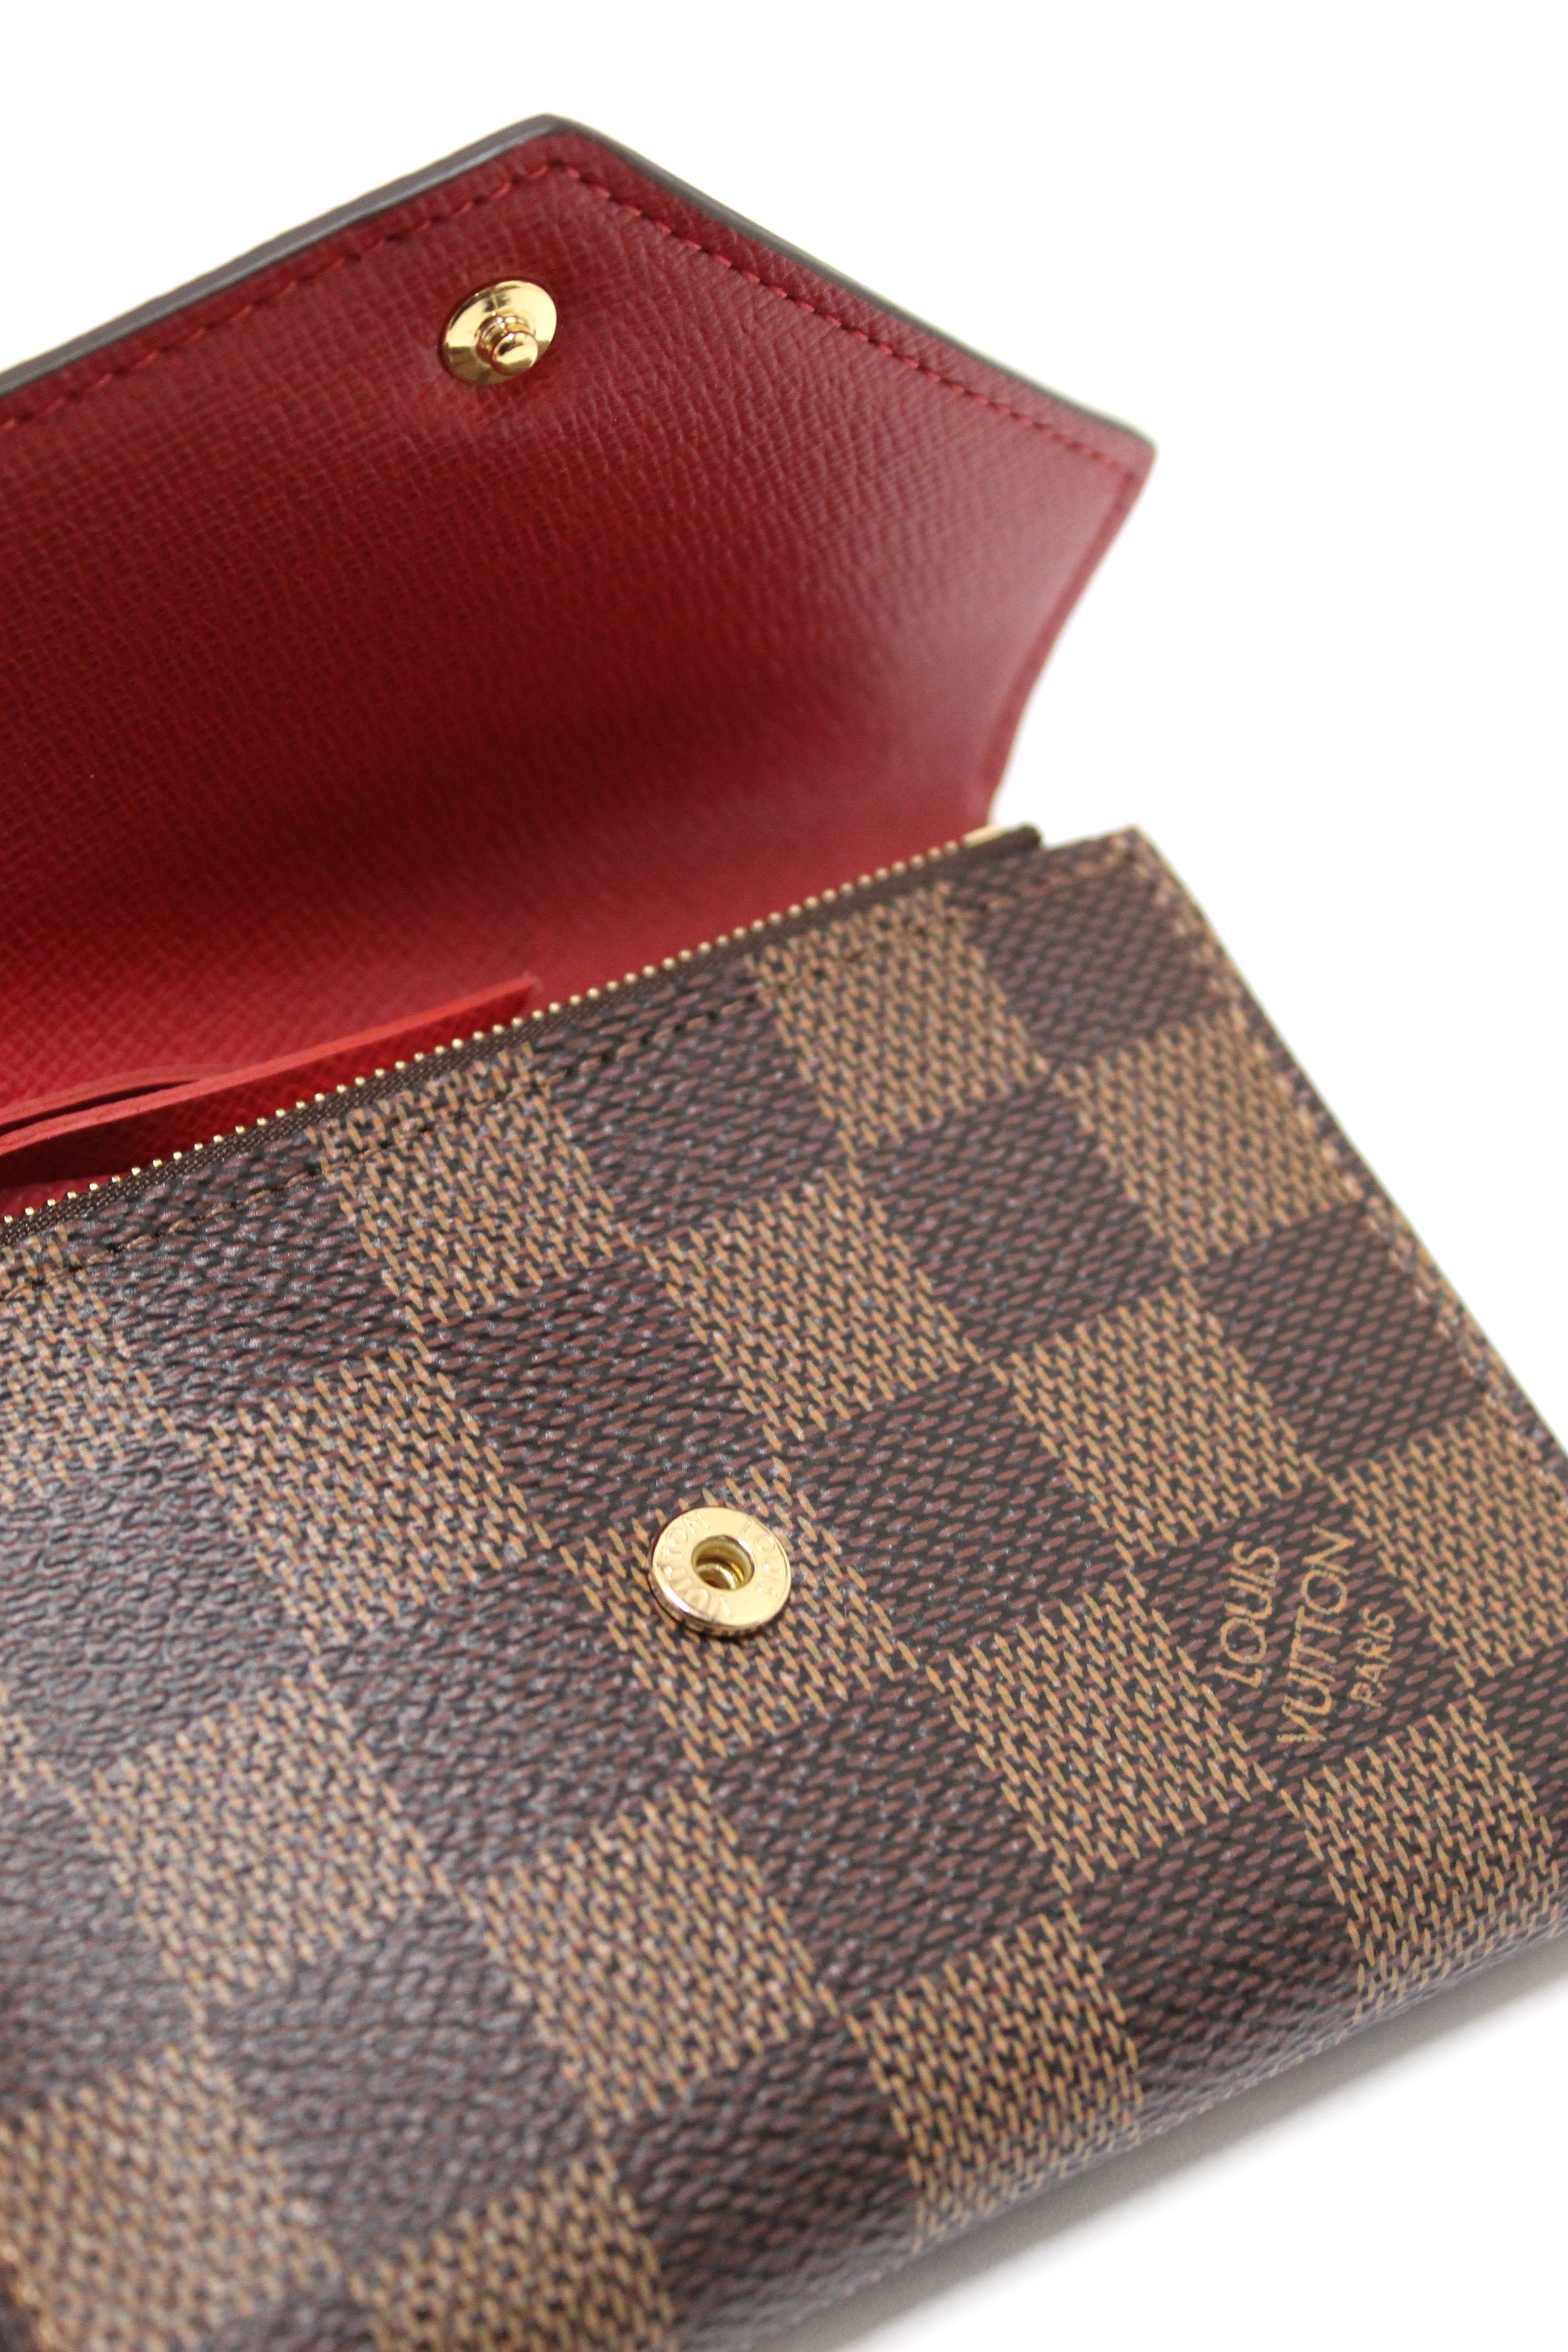 Authentic Louis Vuitton Damier Ebene Victorine with Red Interior Trifold Wallet